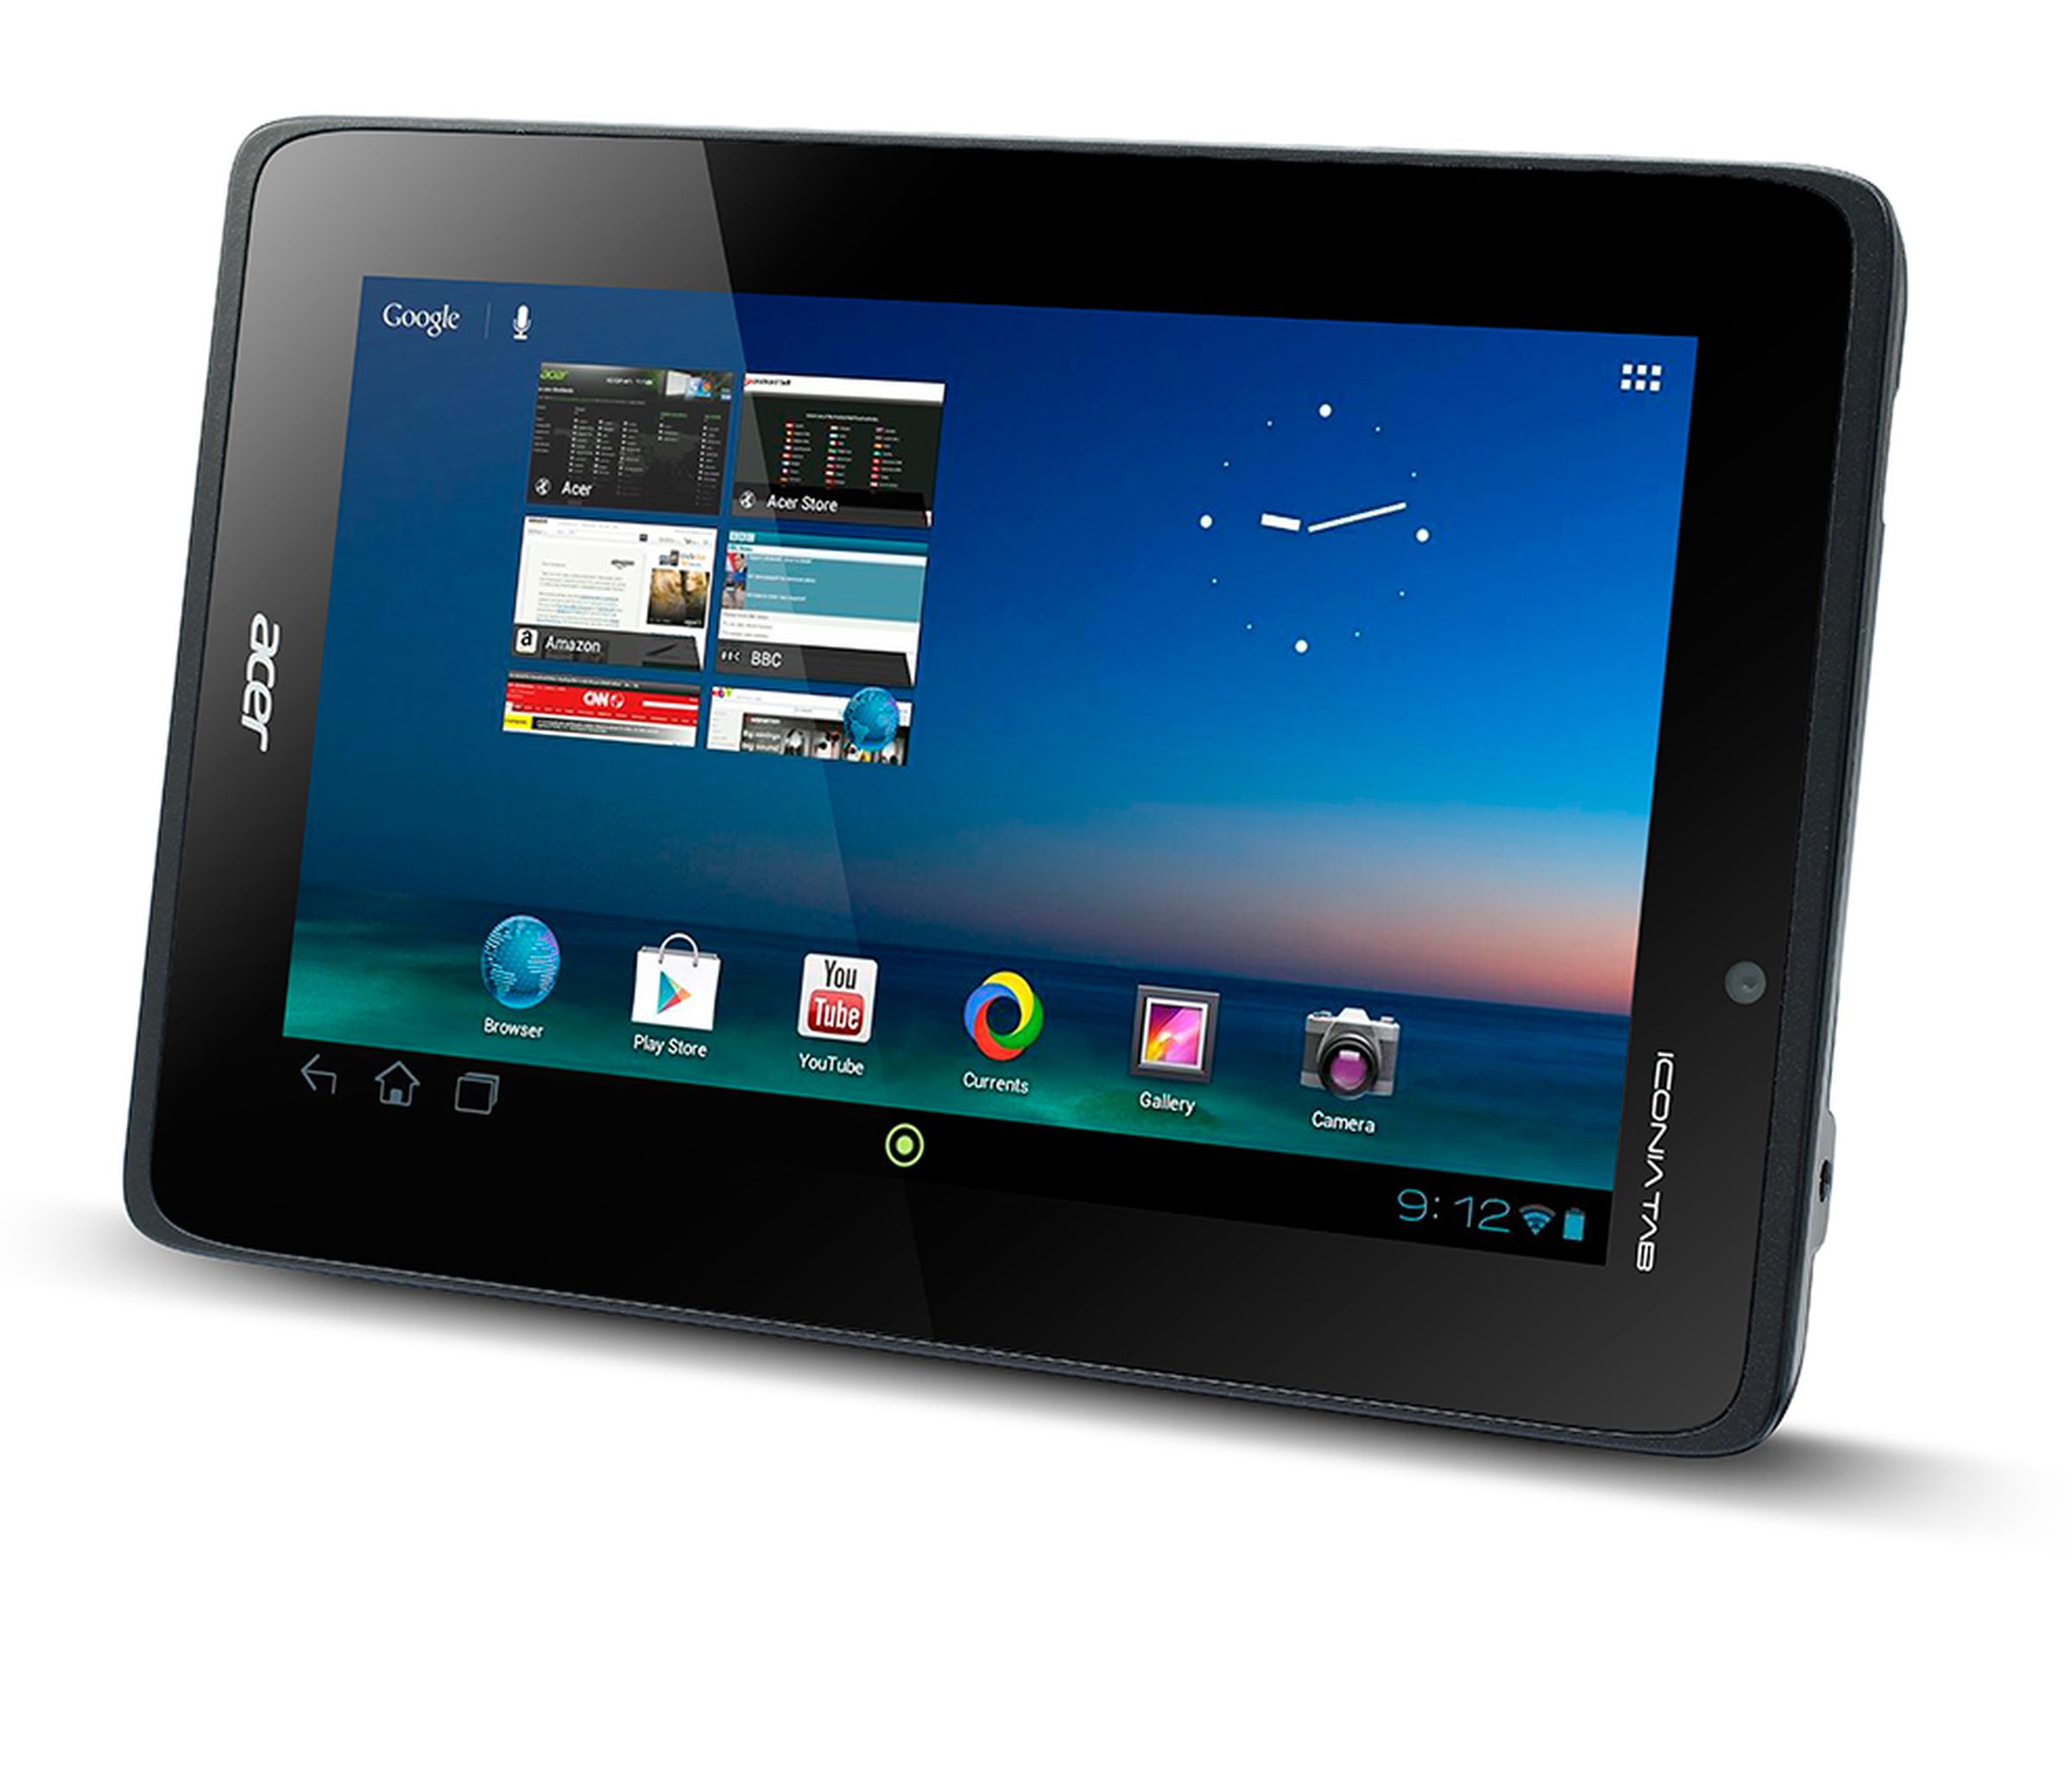 Acer Iconia Tab A110 Press Images